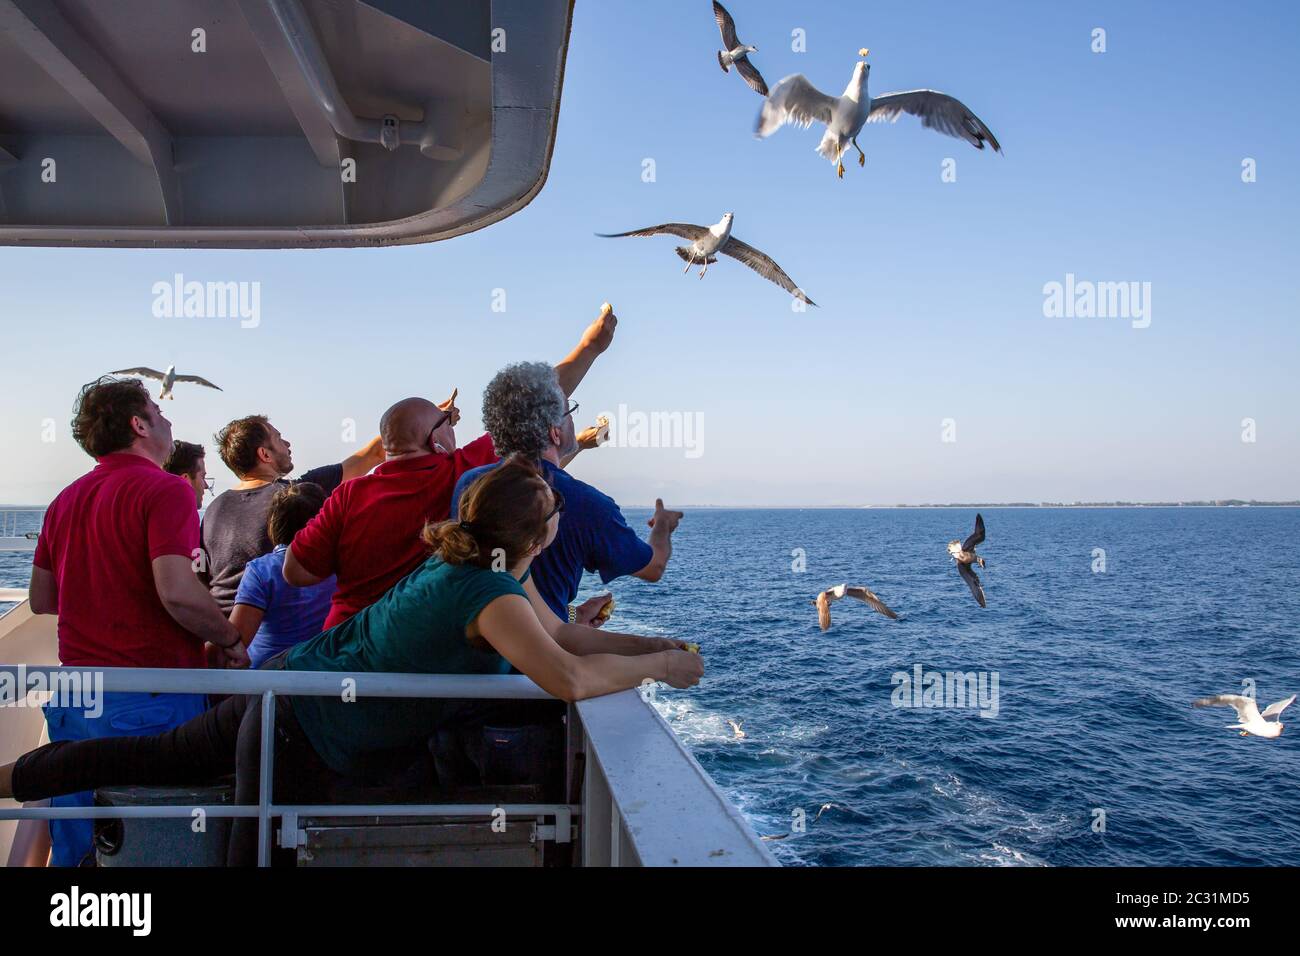 Thassos / Greece - 10.28.2015: People trying to feed the seagulls from the deck of an island ferry, seagull catching the cracker, blue calm sea in the Stock Photo